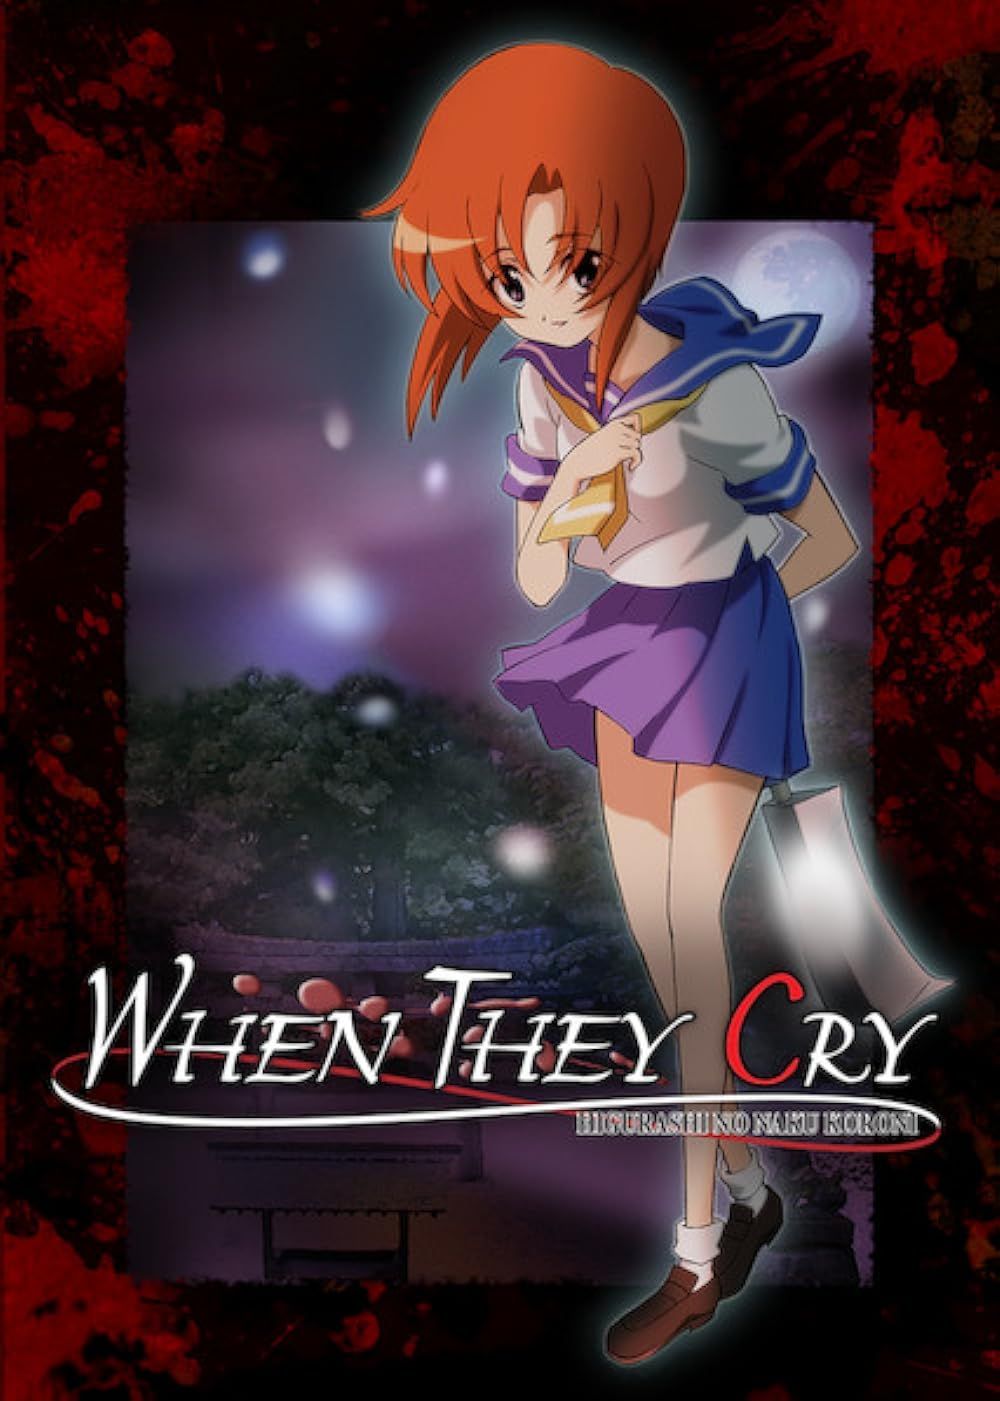 Rena on the poster of Higurashi When They Cry